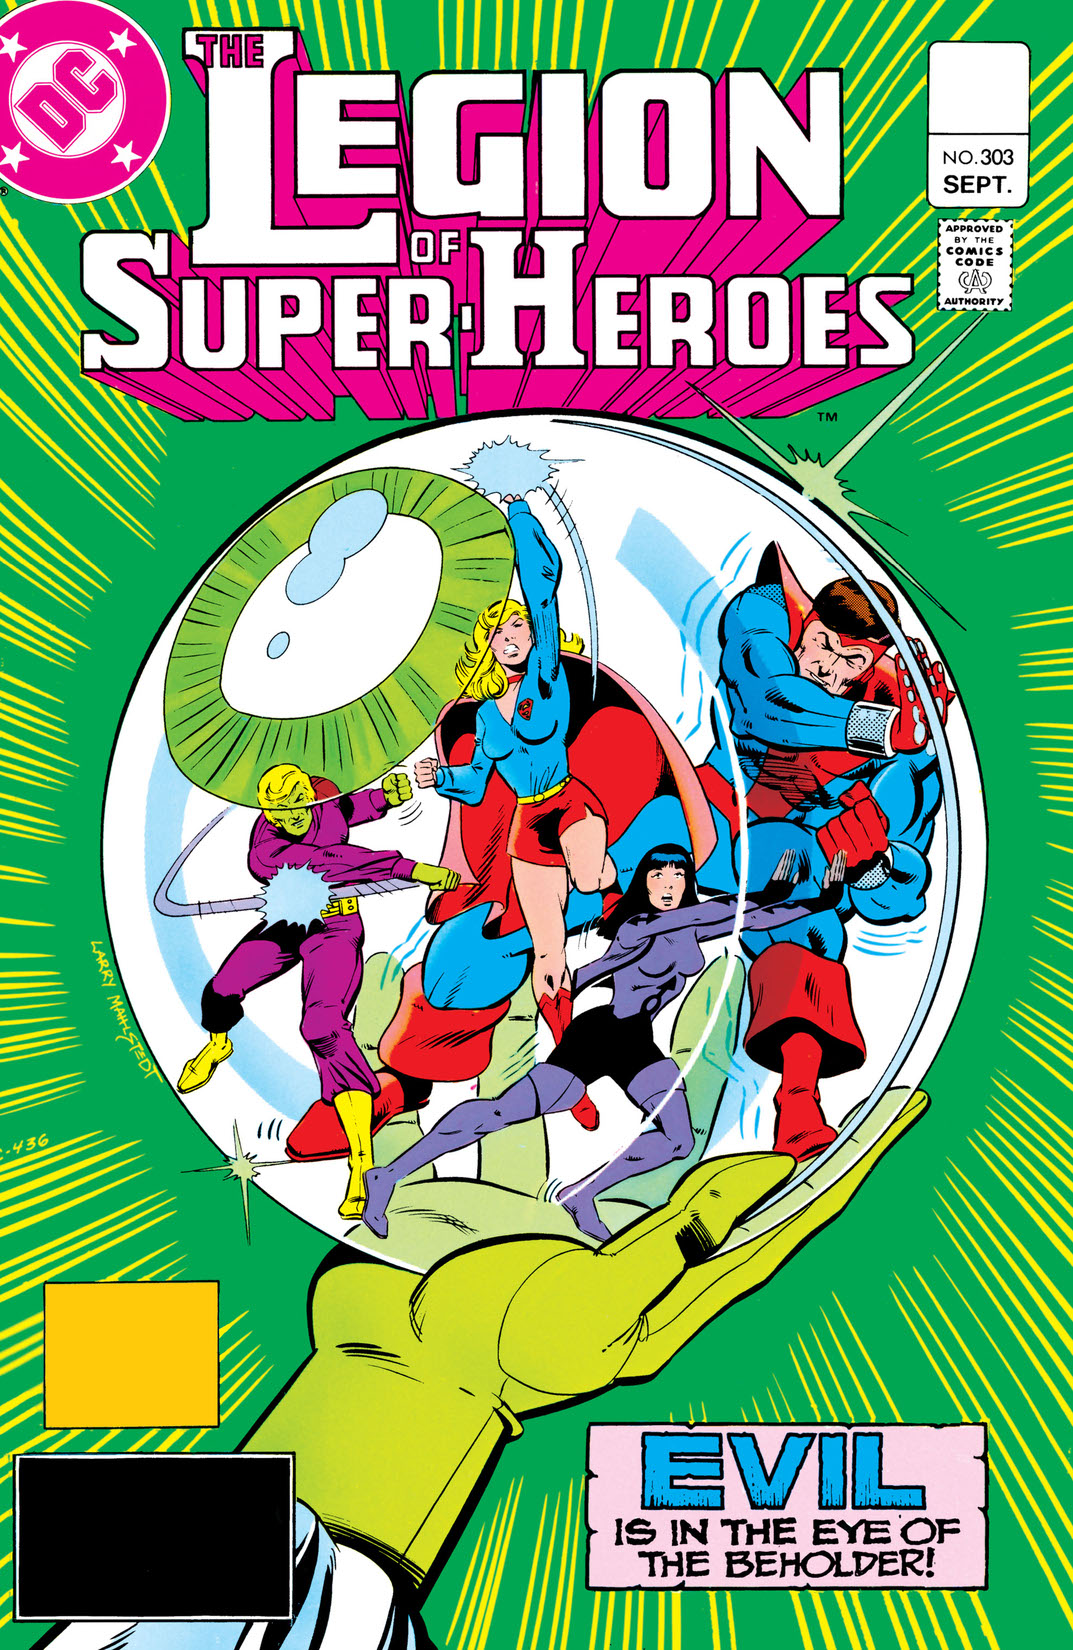 The Legion of Super-Heroes (1980-) #303 preview images